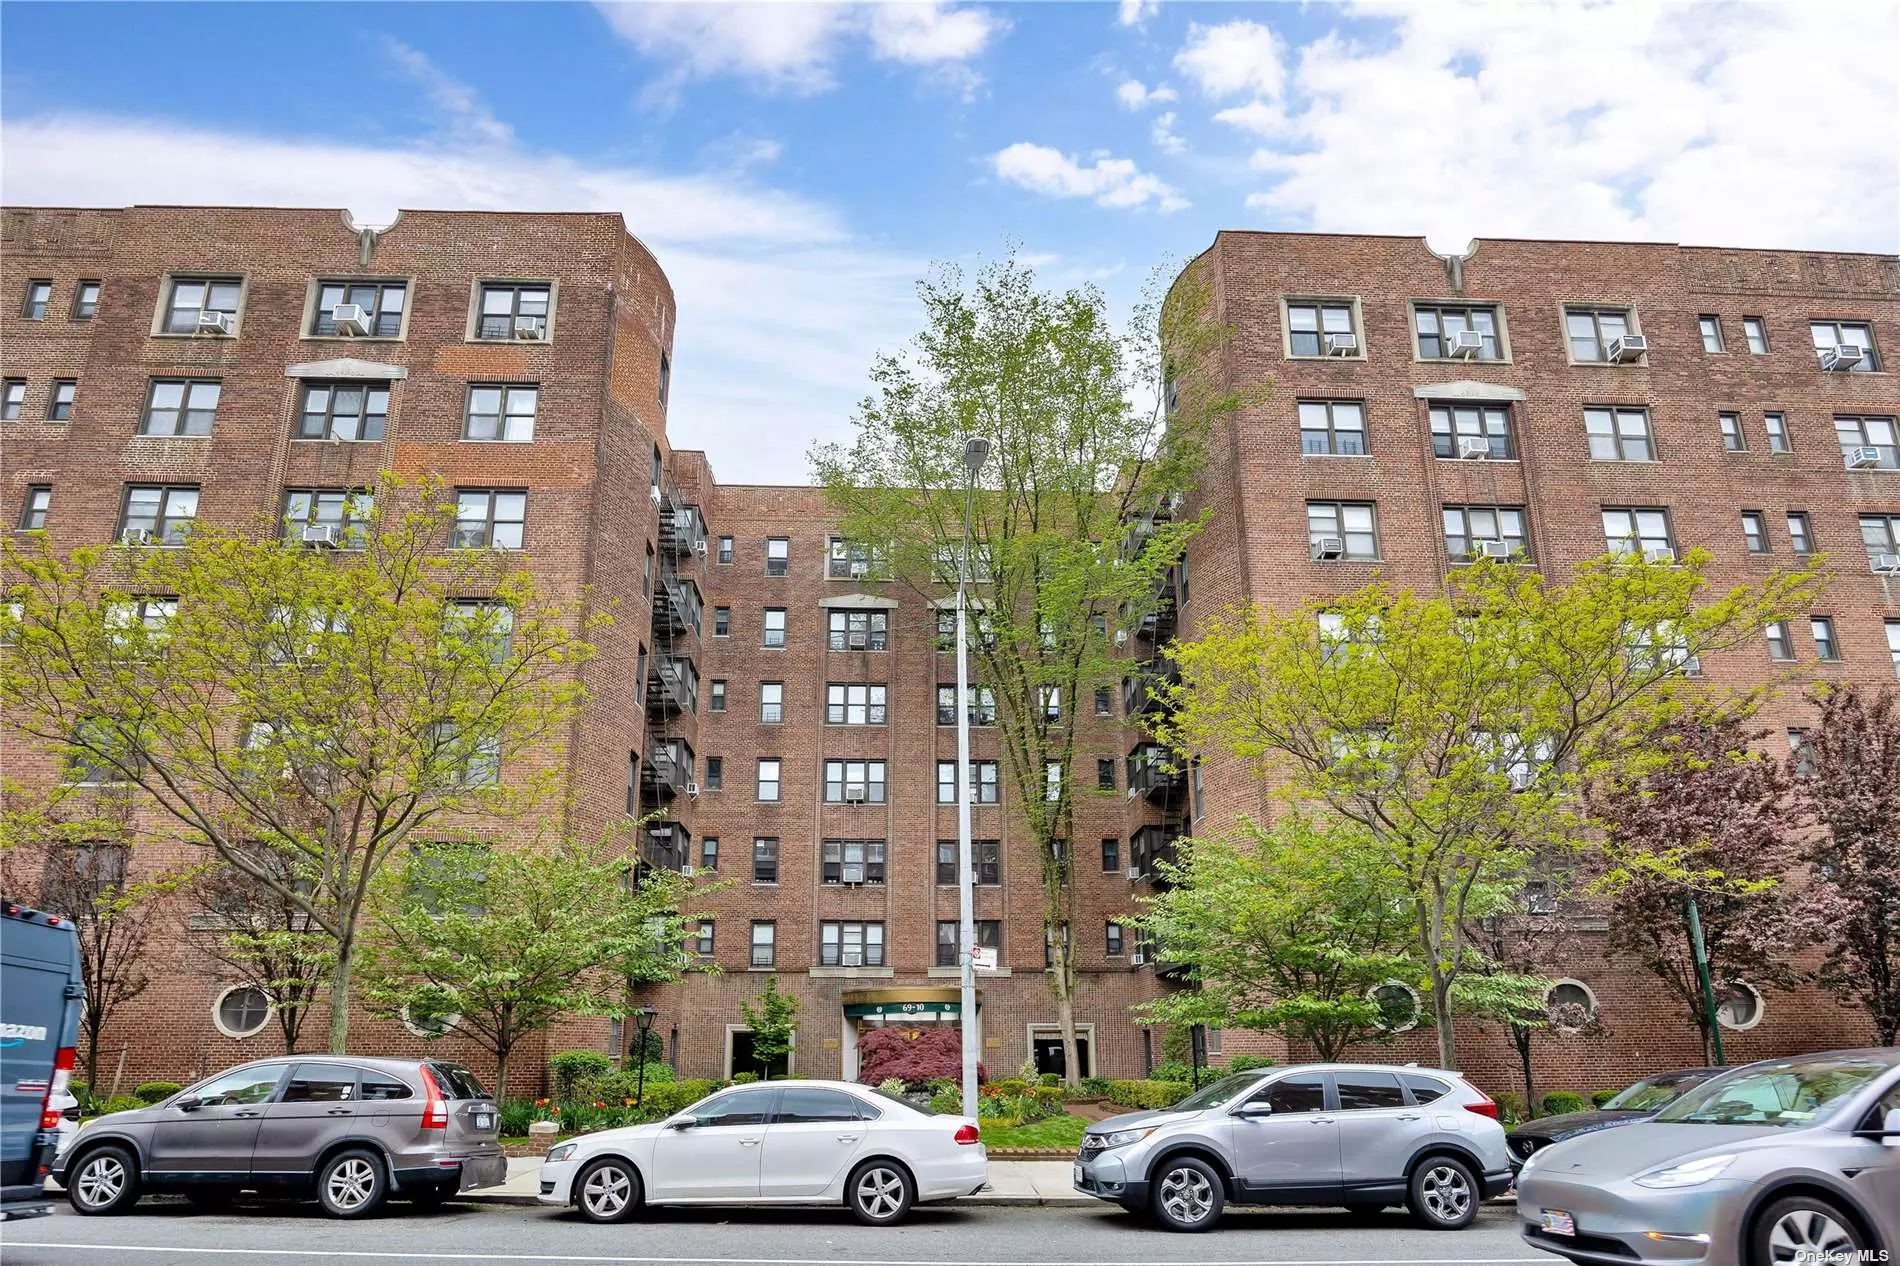 Welcome to this spacious 1 bedrm Coop located in the lovely Forest Hills neighborhood. The unit is Located on the 5th floor and offers a peaceful retreat overlooking a tranquil park-like courtyard with water features. As you enter, you will be greeted by an EIK with dinette area, SS appliances & a bright & airy LR/Dr. Wood floors, freshly painted walls, in-unit electrical panel, 2 AC units & Laundry facilities on site. 18 hr. doorman service, 7 days a week. The maintenance fee covers heat, hot water, Taxes and gas. A storage unit is available in the basement for a small fee. Parking is also available for a fee, with a waitlist currently in place. The best part? There is no flip tax! Each resident is allowed a maximum of 2 in door cats. Smoking is prohibited in all common areas; residents may smoke inside their units only. Located in a prime Forest Hills location, this Coop is within a short distance to the LIRR, subway, buses, restaurants, nightlife, and much more! Don&rsquo;t miss out on this incredible opportunity to call this beautiful Co-op your new home. Schedule your showing today!